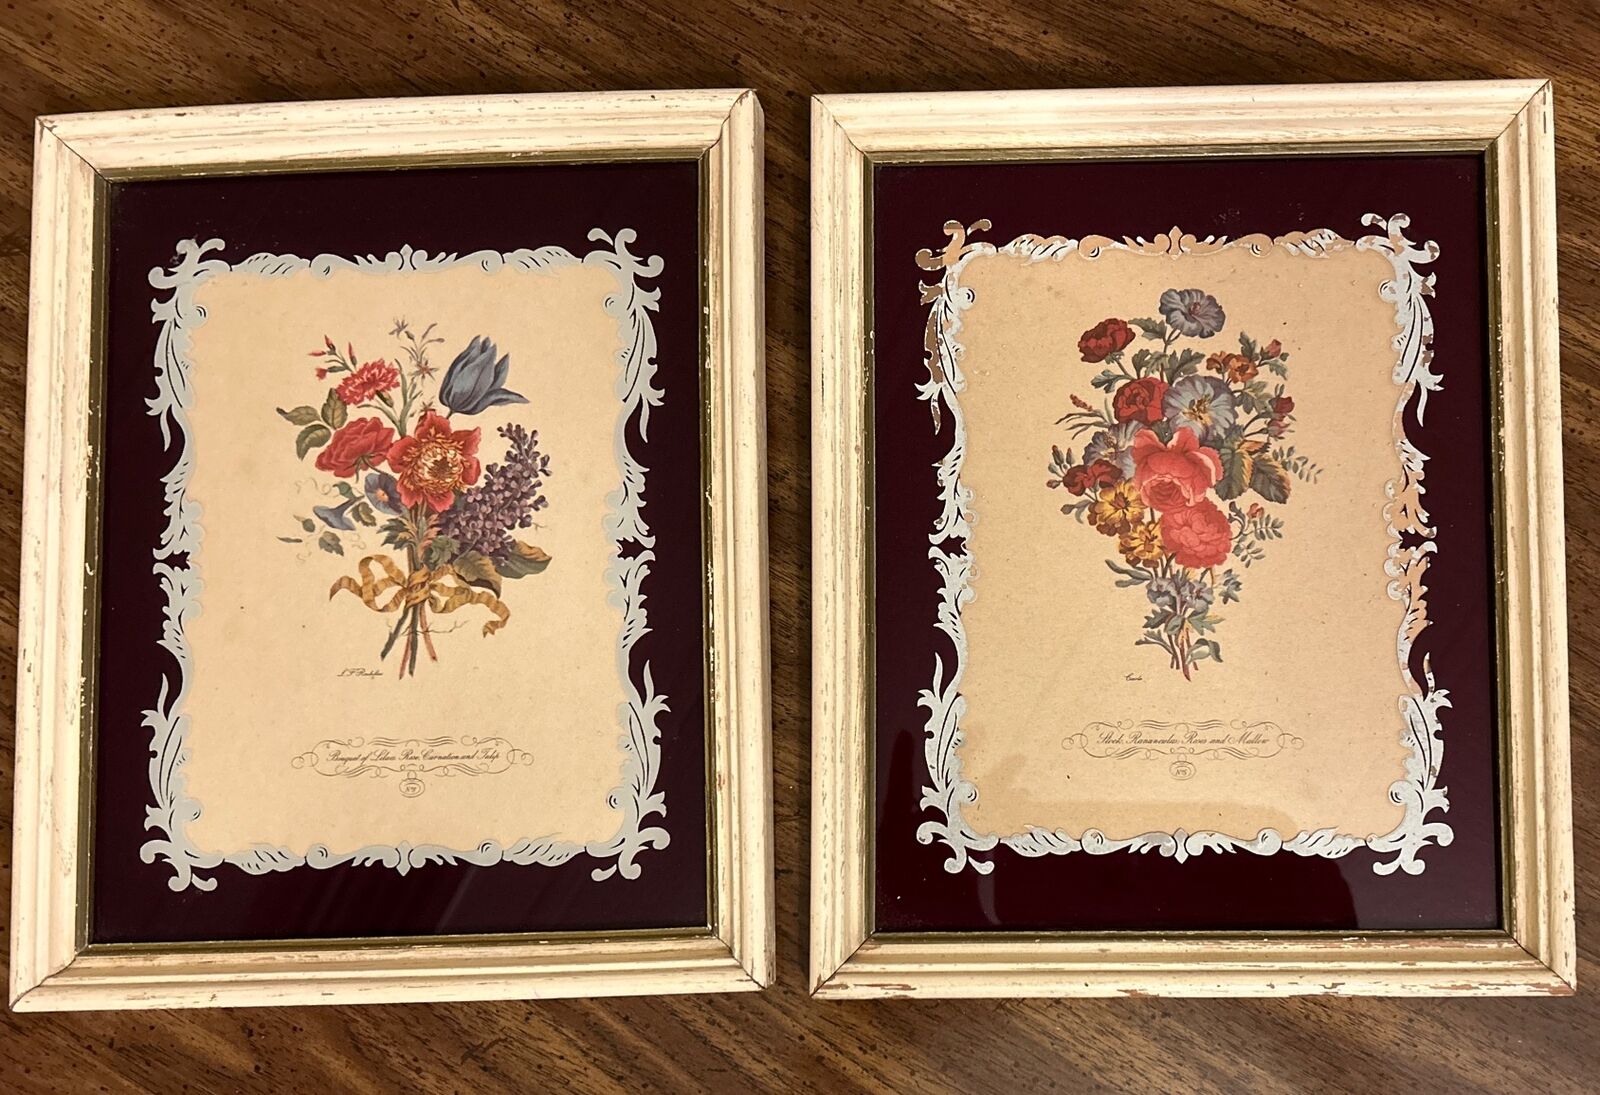 Rustic Weathered Frames Lithograph Roses Floral Design LF Roubillac #8 Carole #5